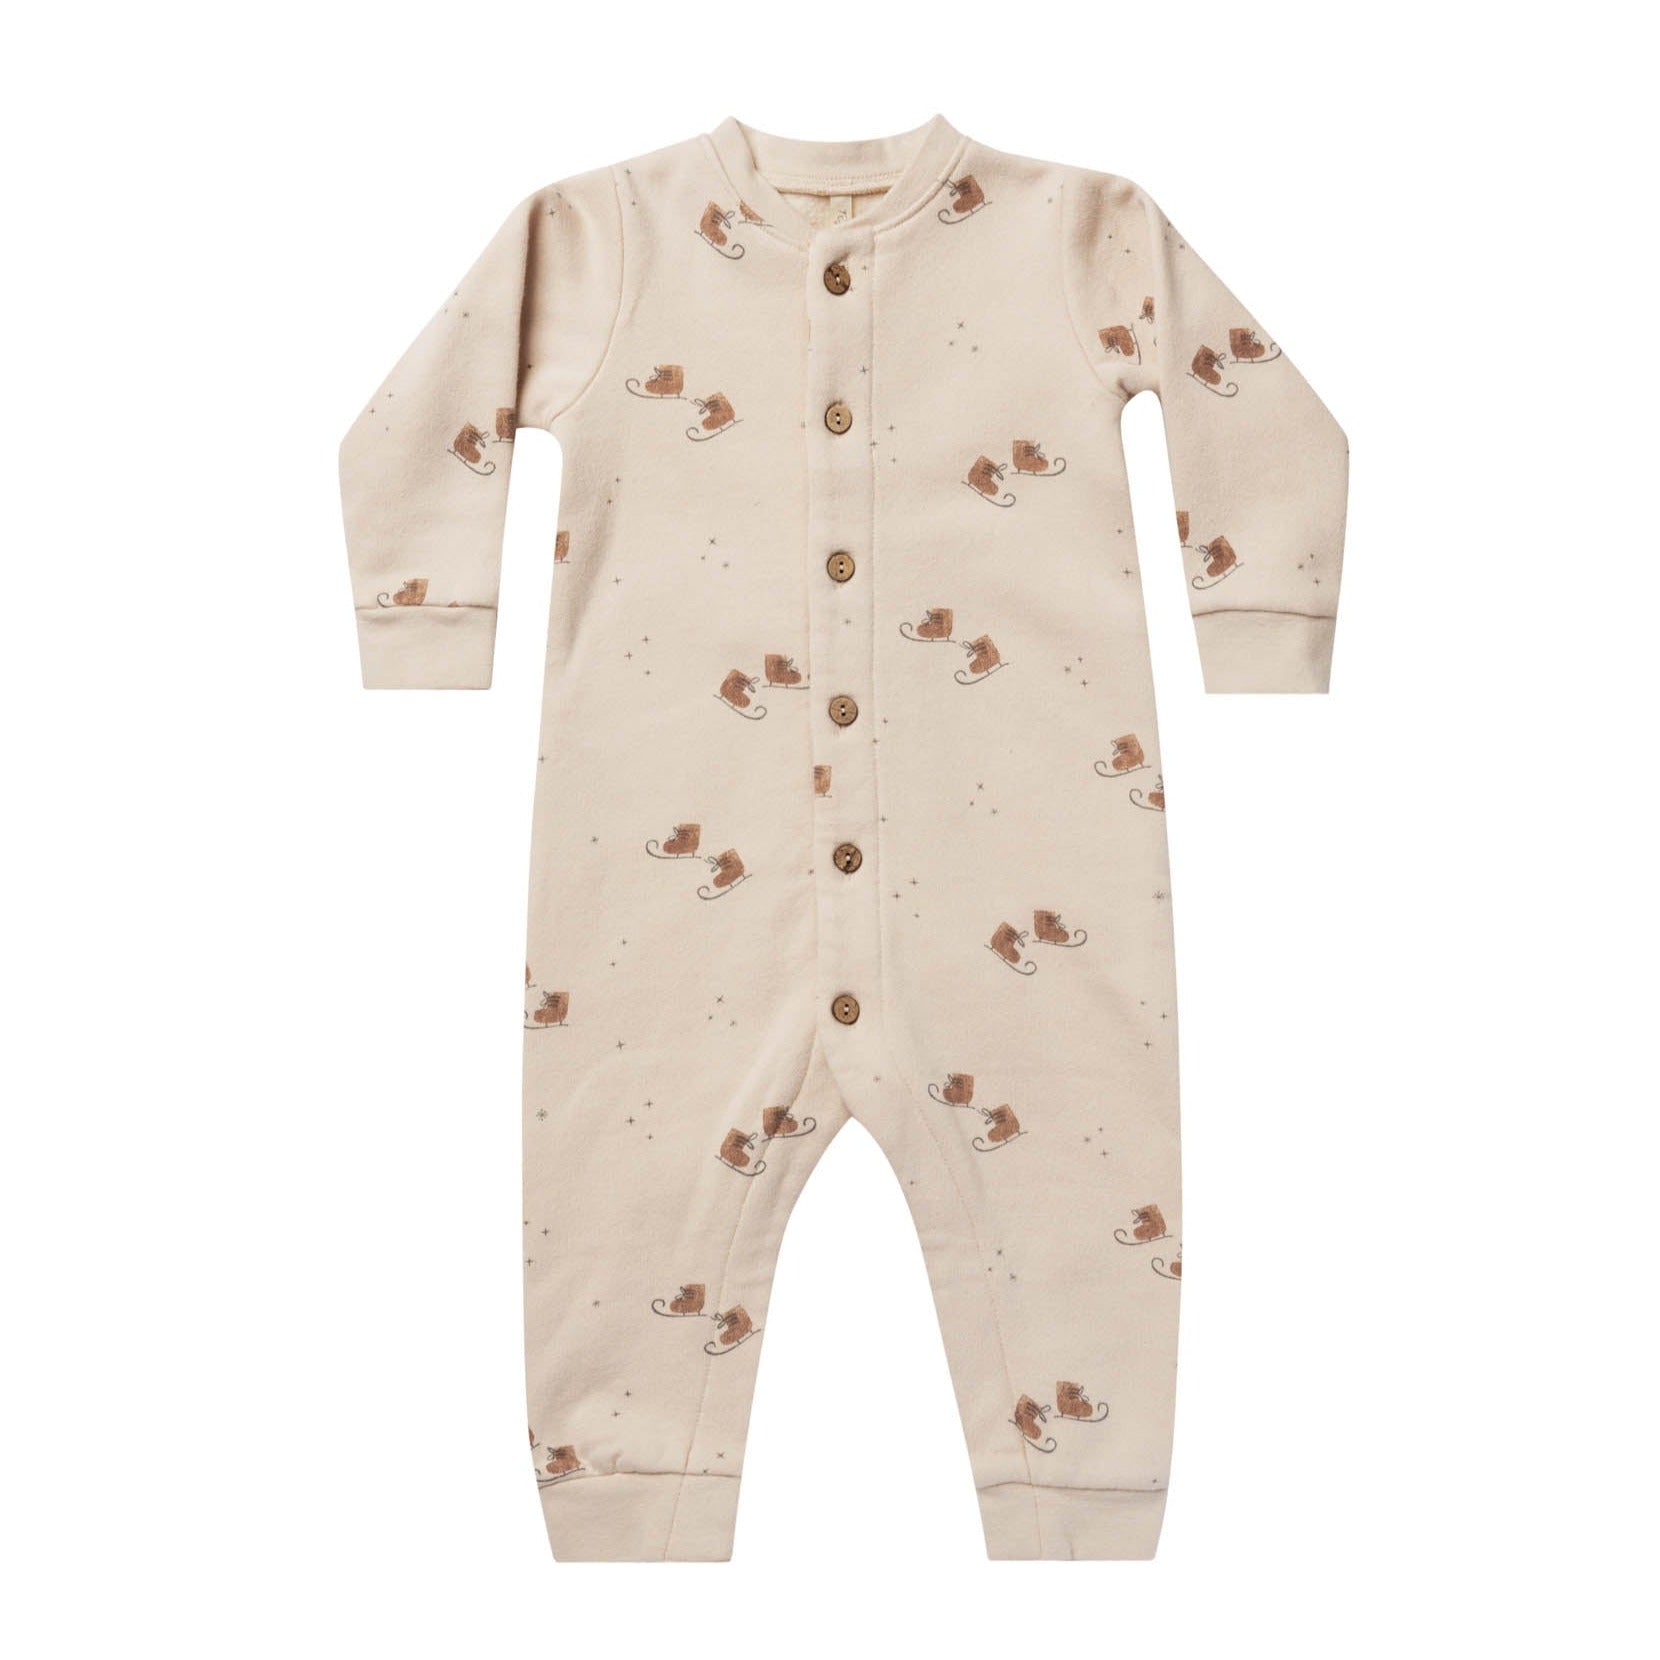 Rylee and Cru fleece long john with Ice Skates print at Bonjour Baby Baskets